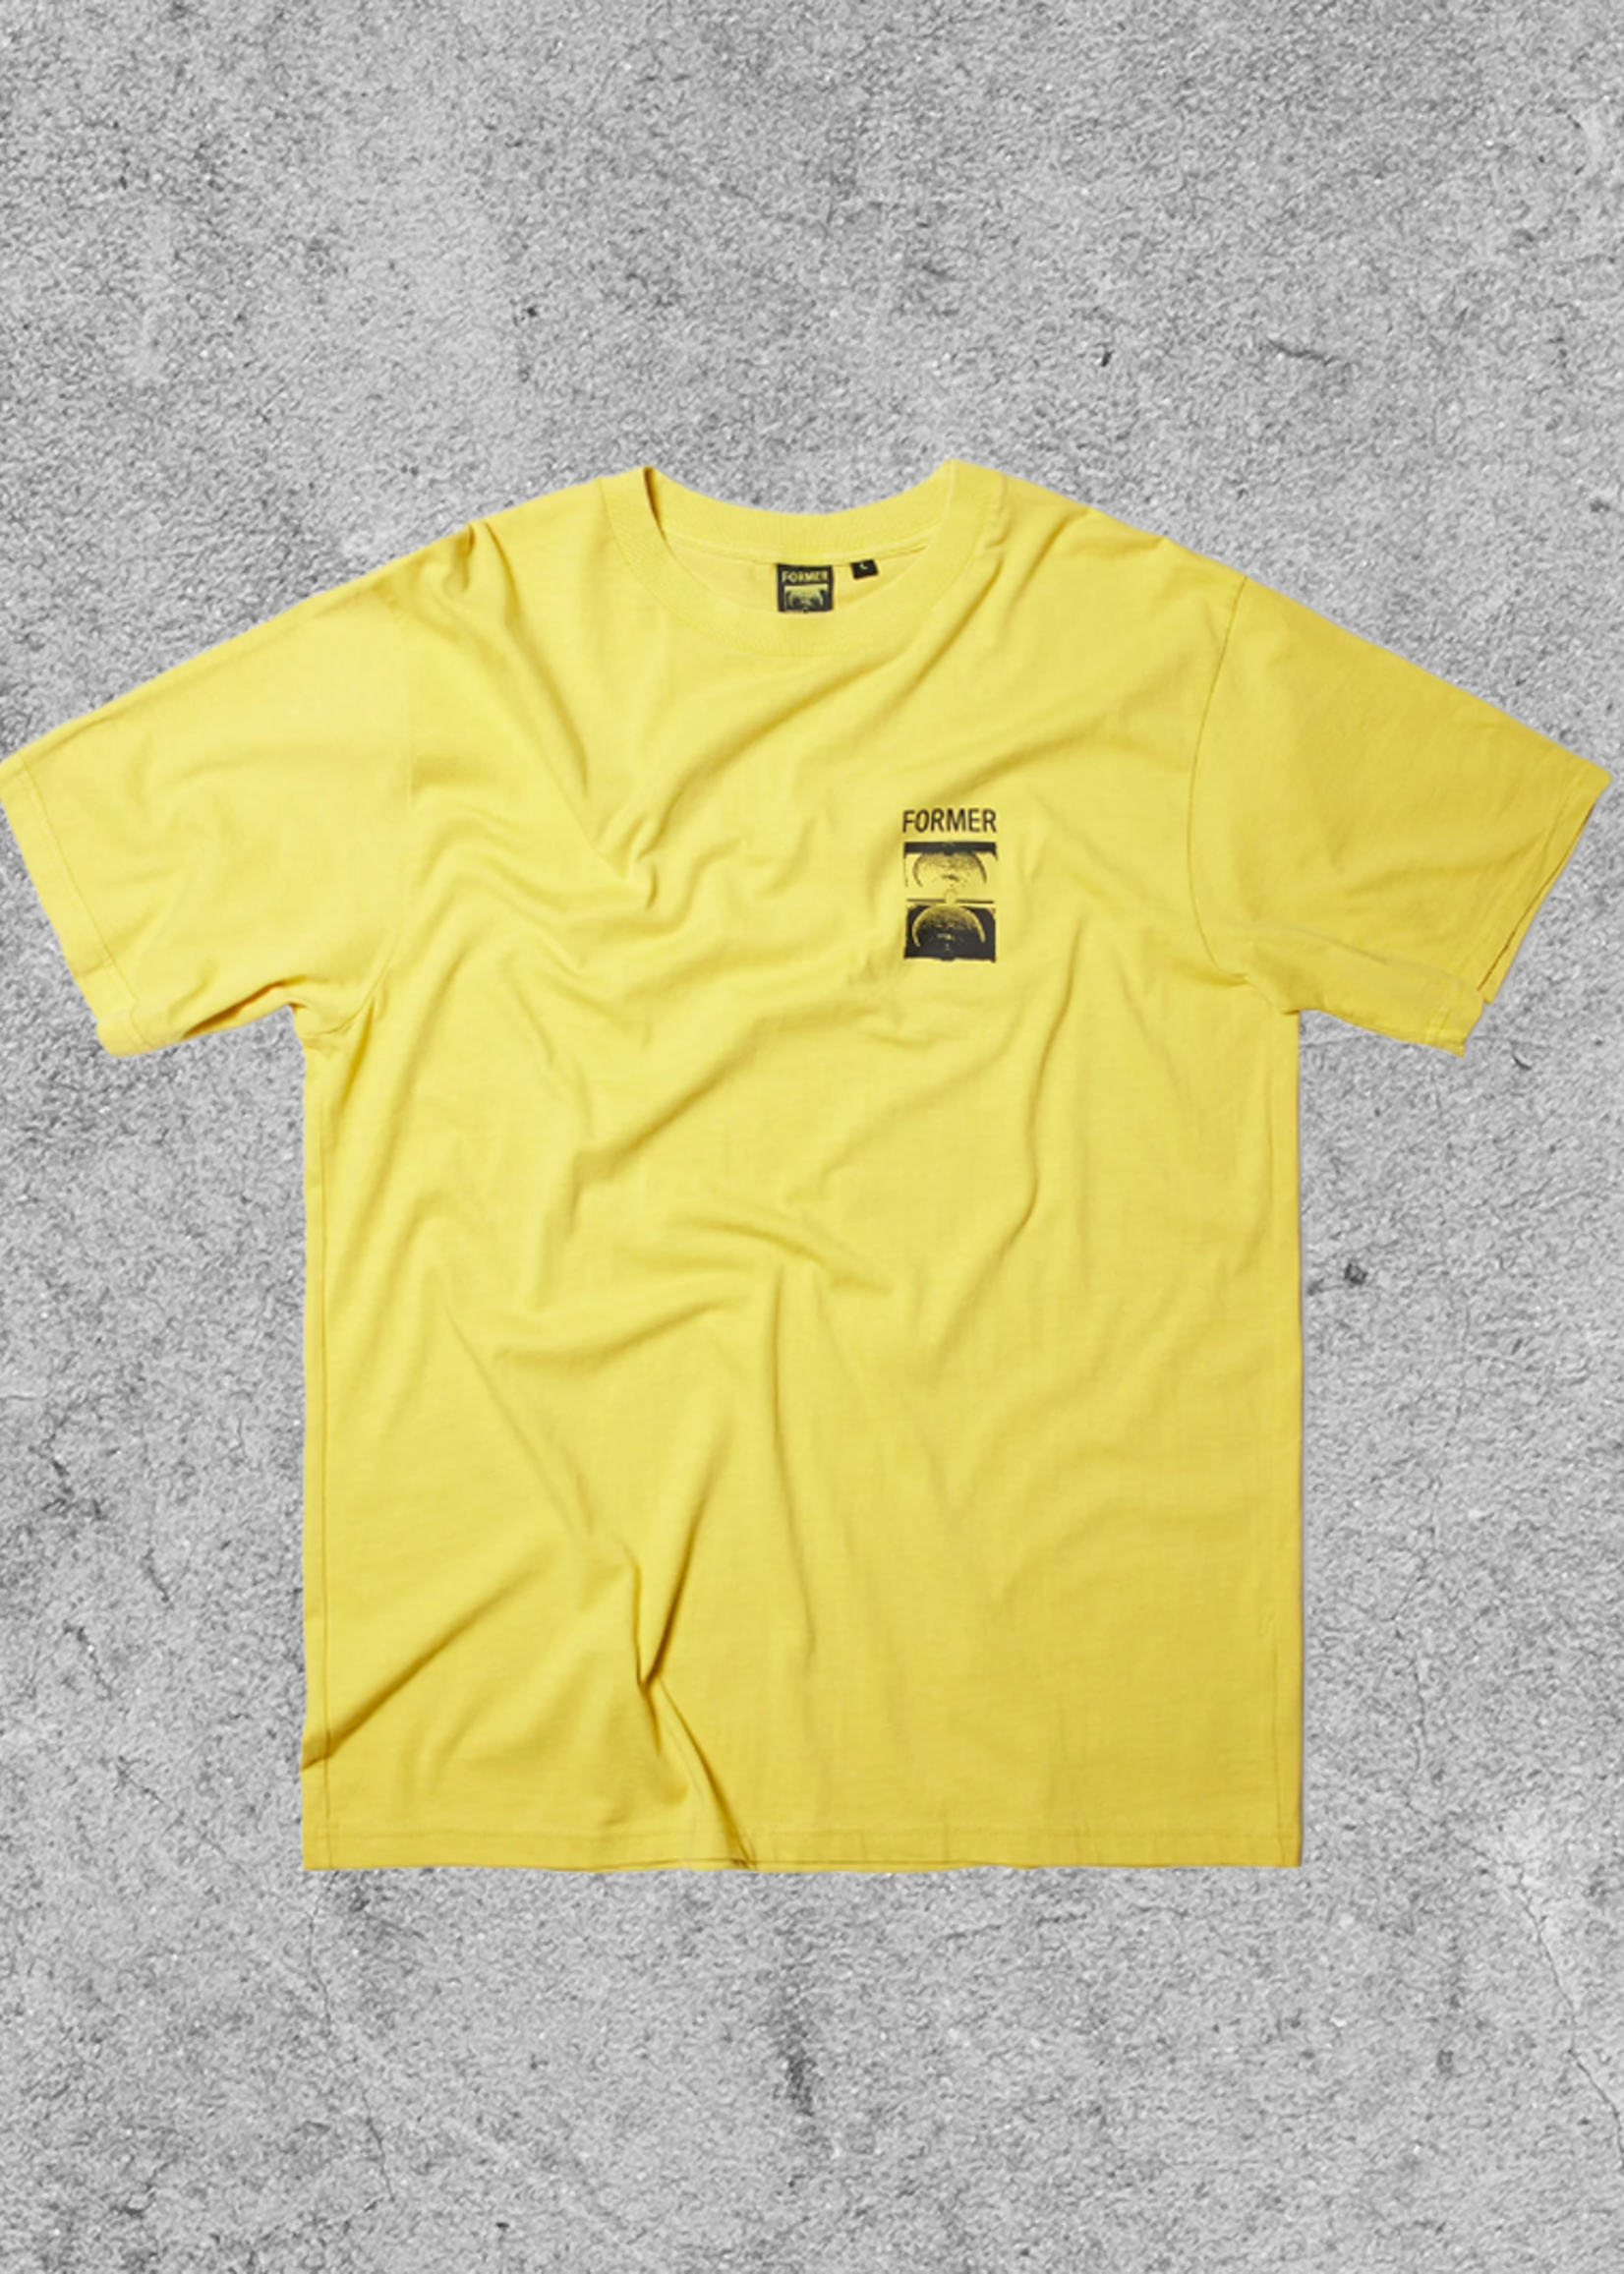 FORMER BRAND FORMER CRUX TEE - WASHED MUSTARD